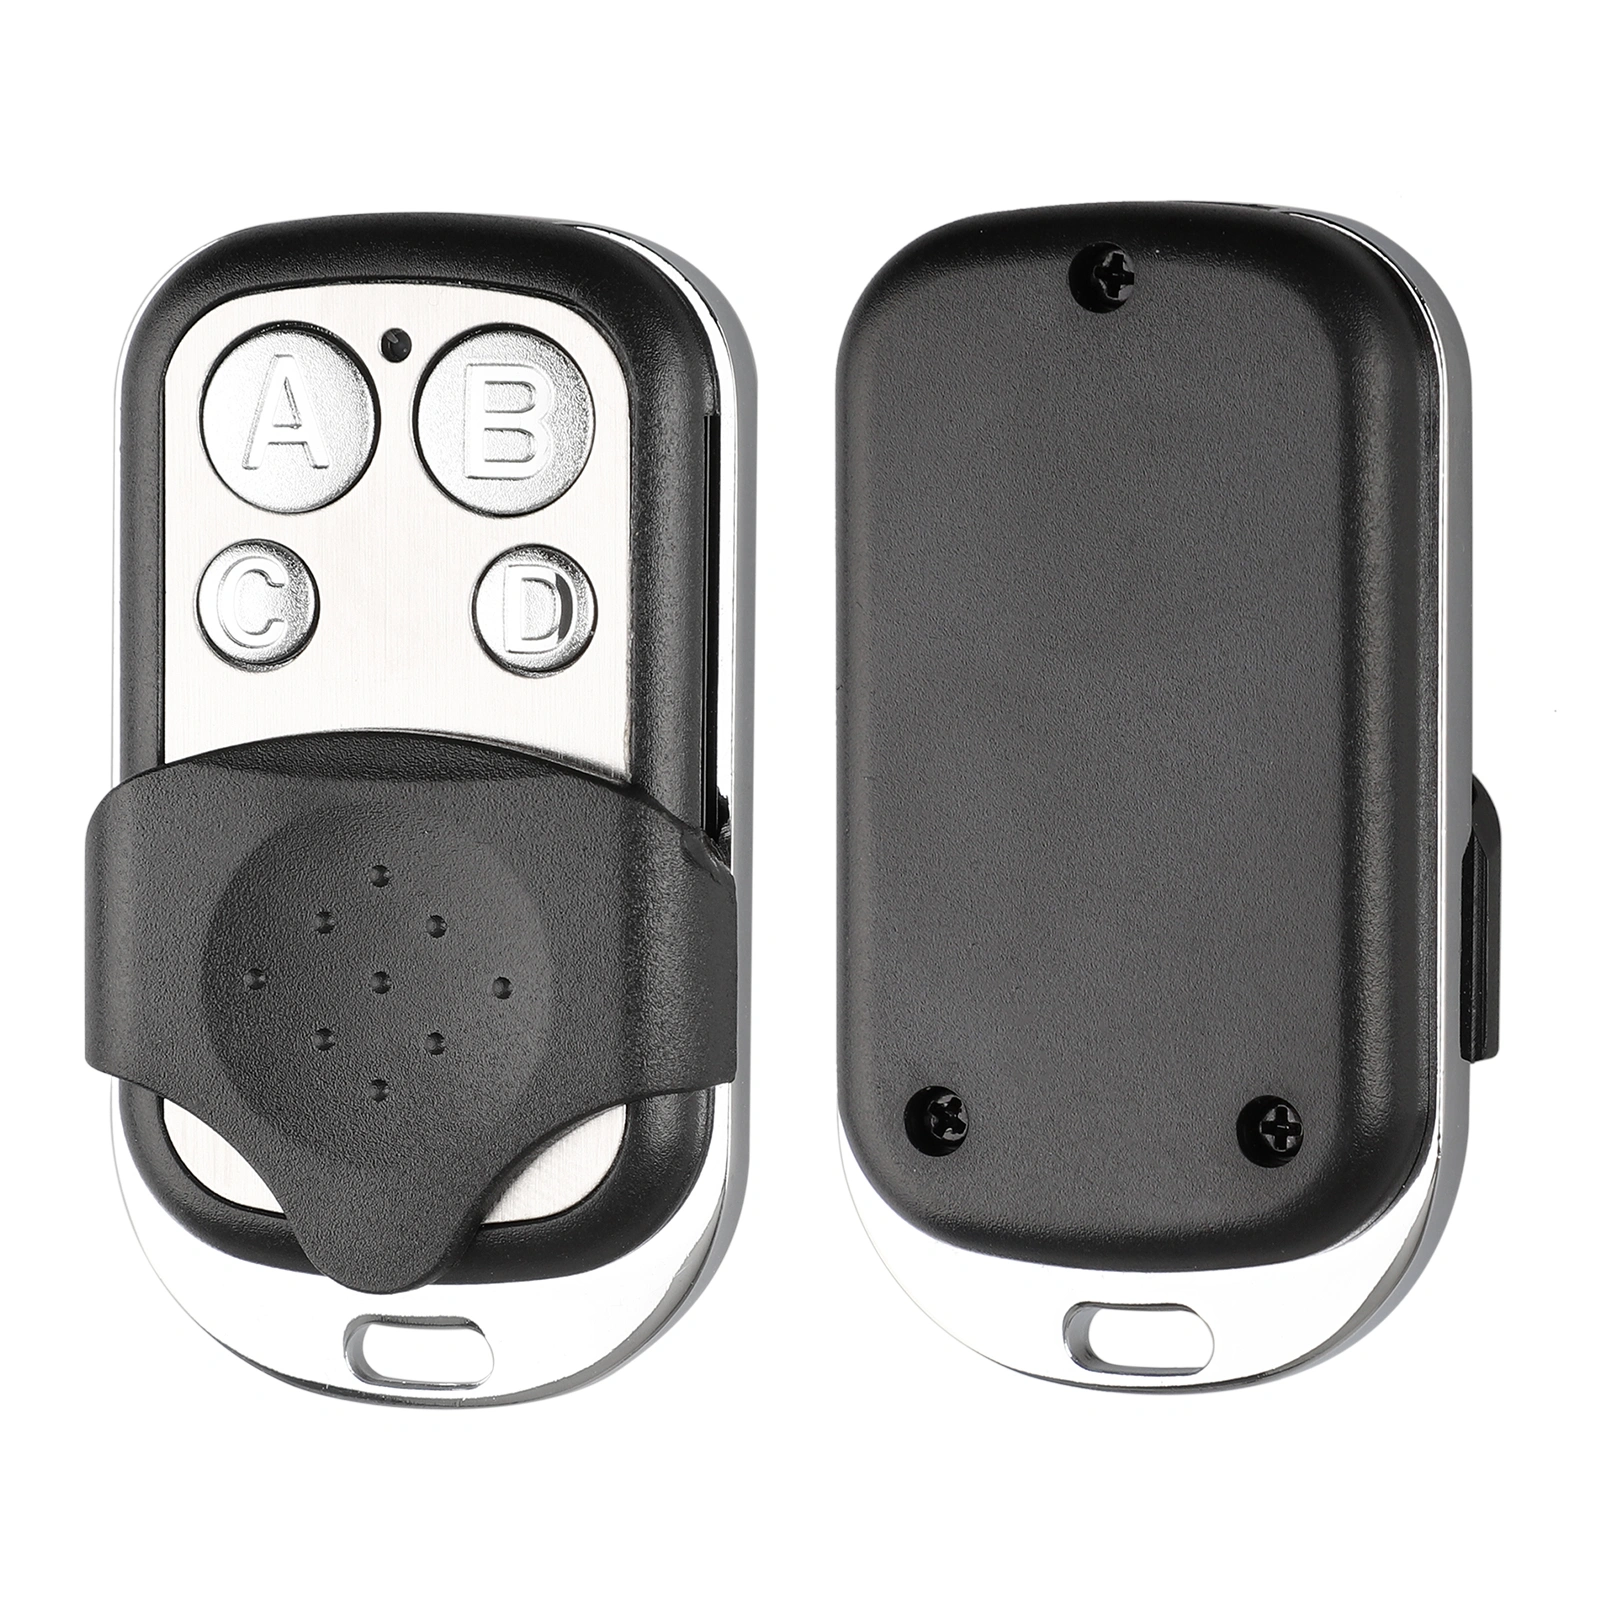 433mhz Electric Cloning Universal Gate Garage Door Remote Control Key Fob universal remote control for home alarms